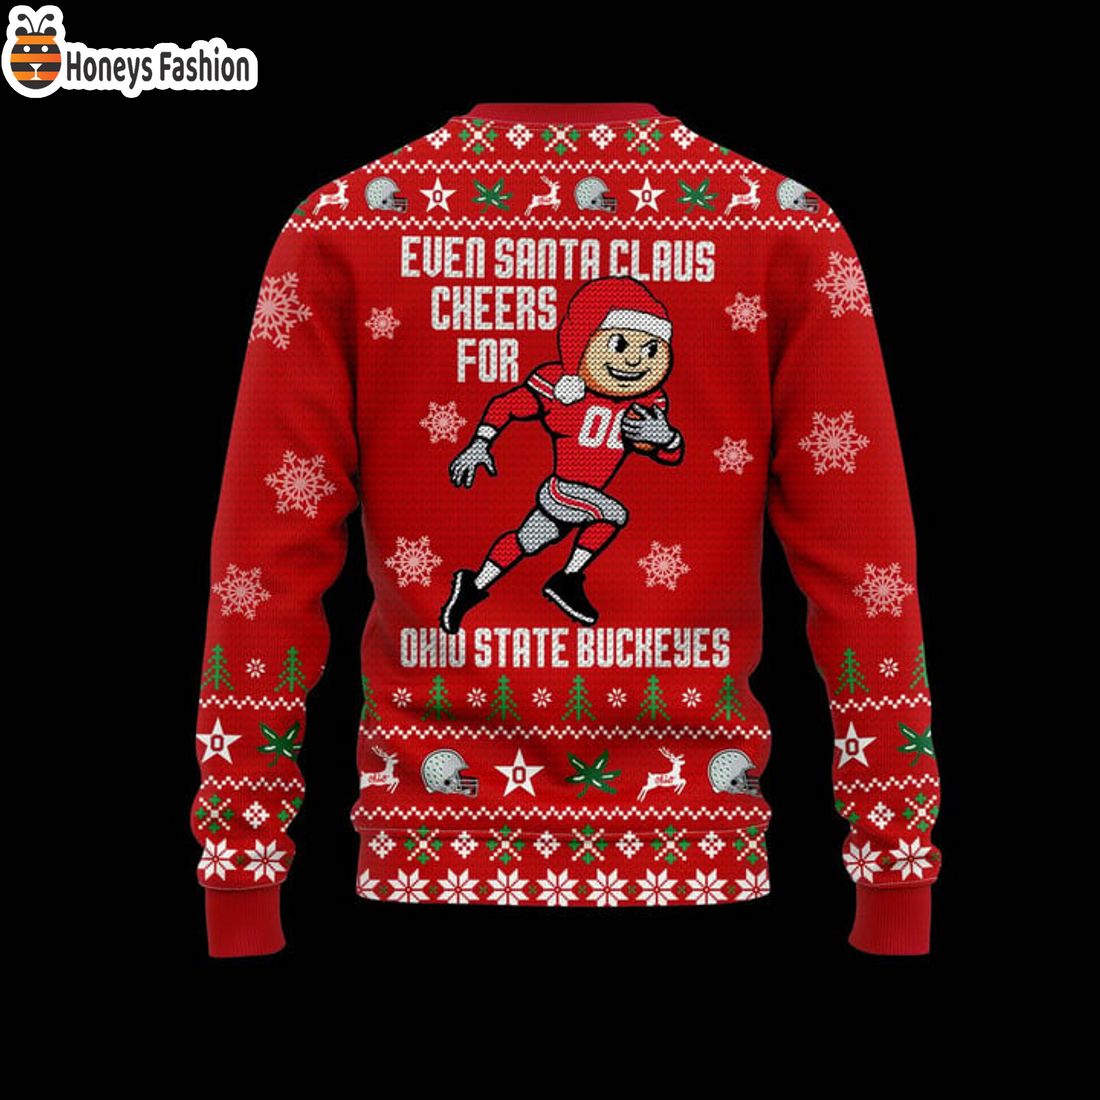 HOT Ohio State Buckeyes Even Santa Claus Cheers Ugly Christmas Sweater